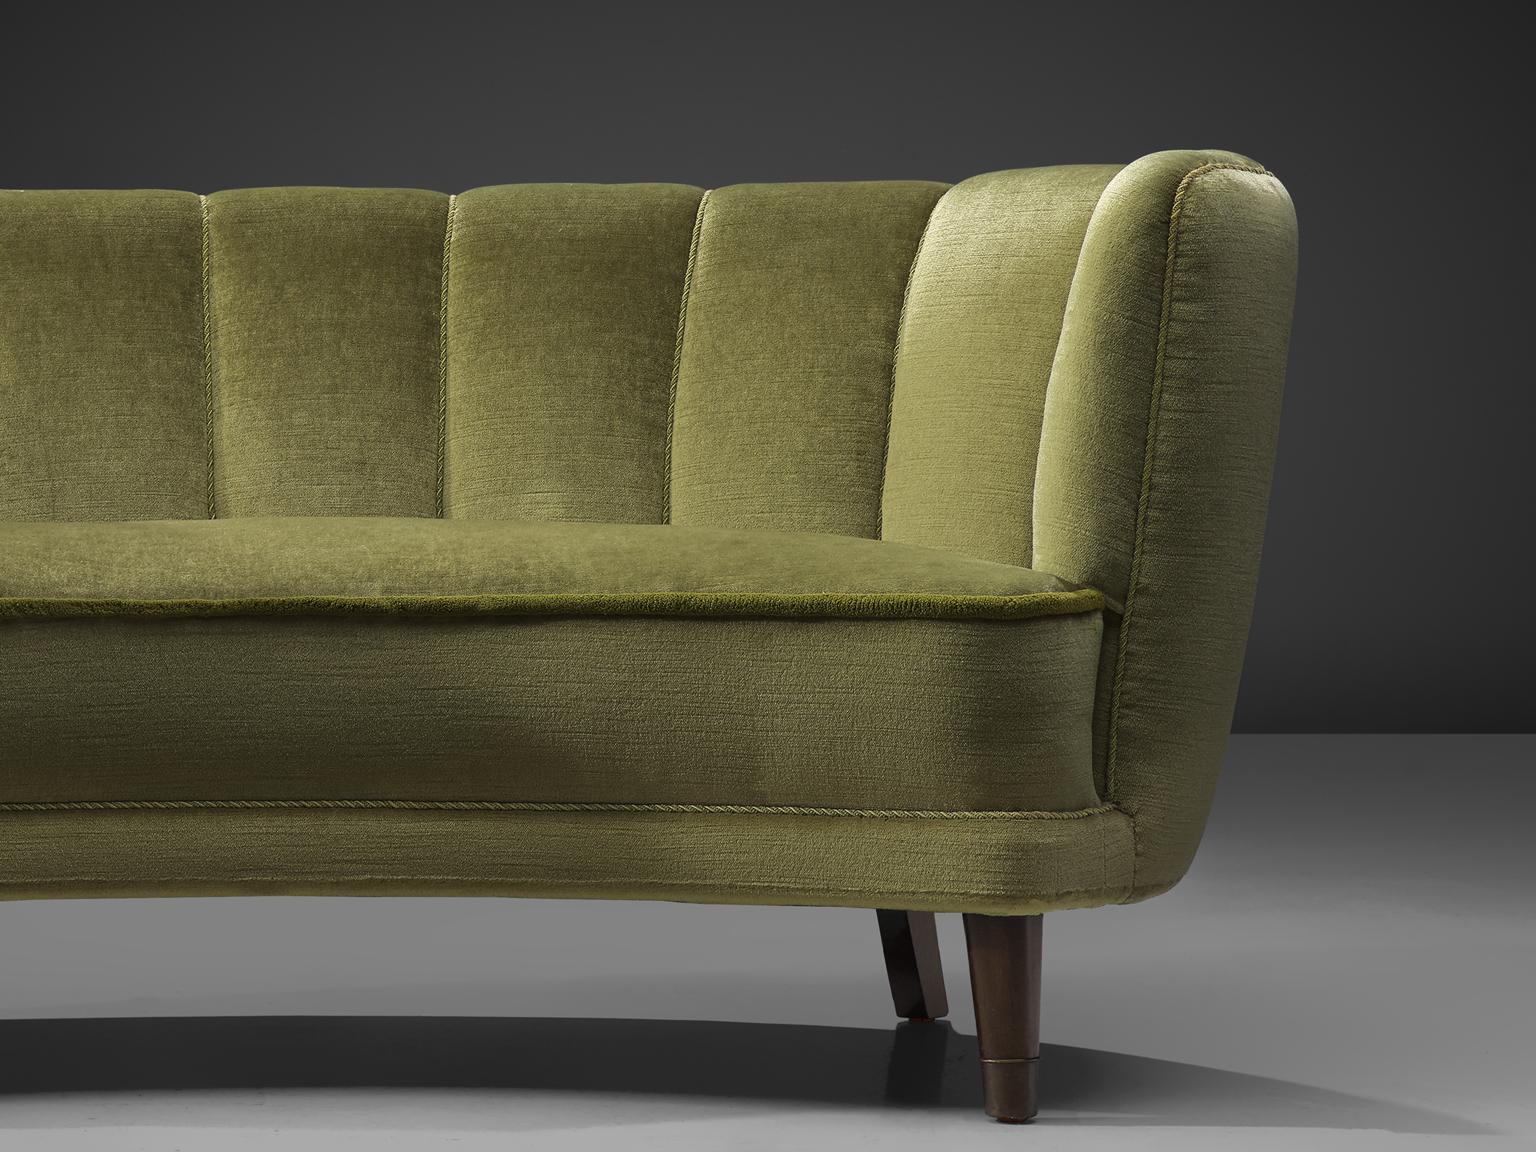 Mid-20th Century French Classic Sofa with Green Velvet Upholstery